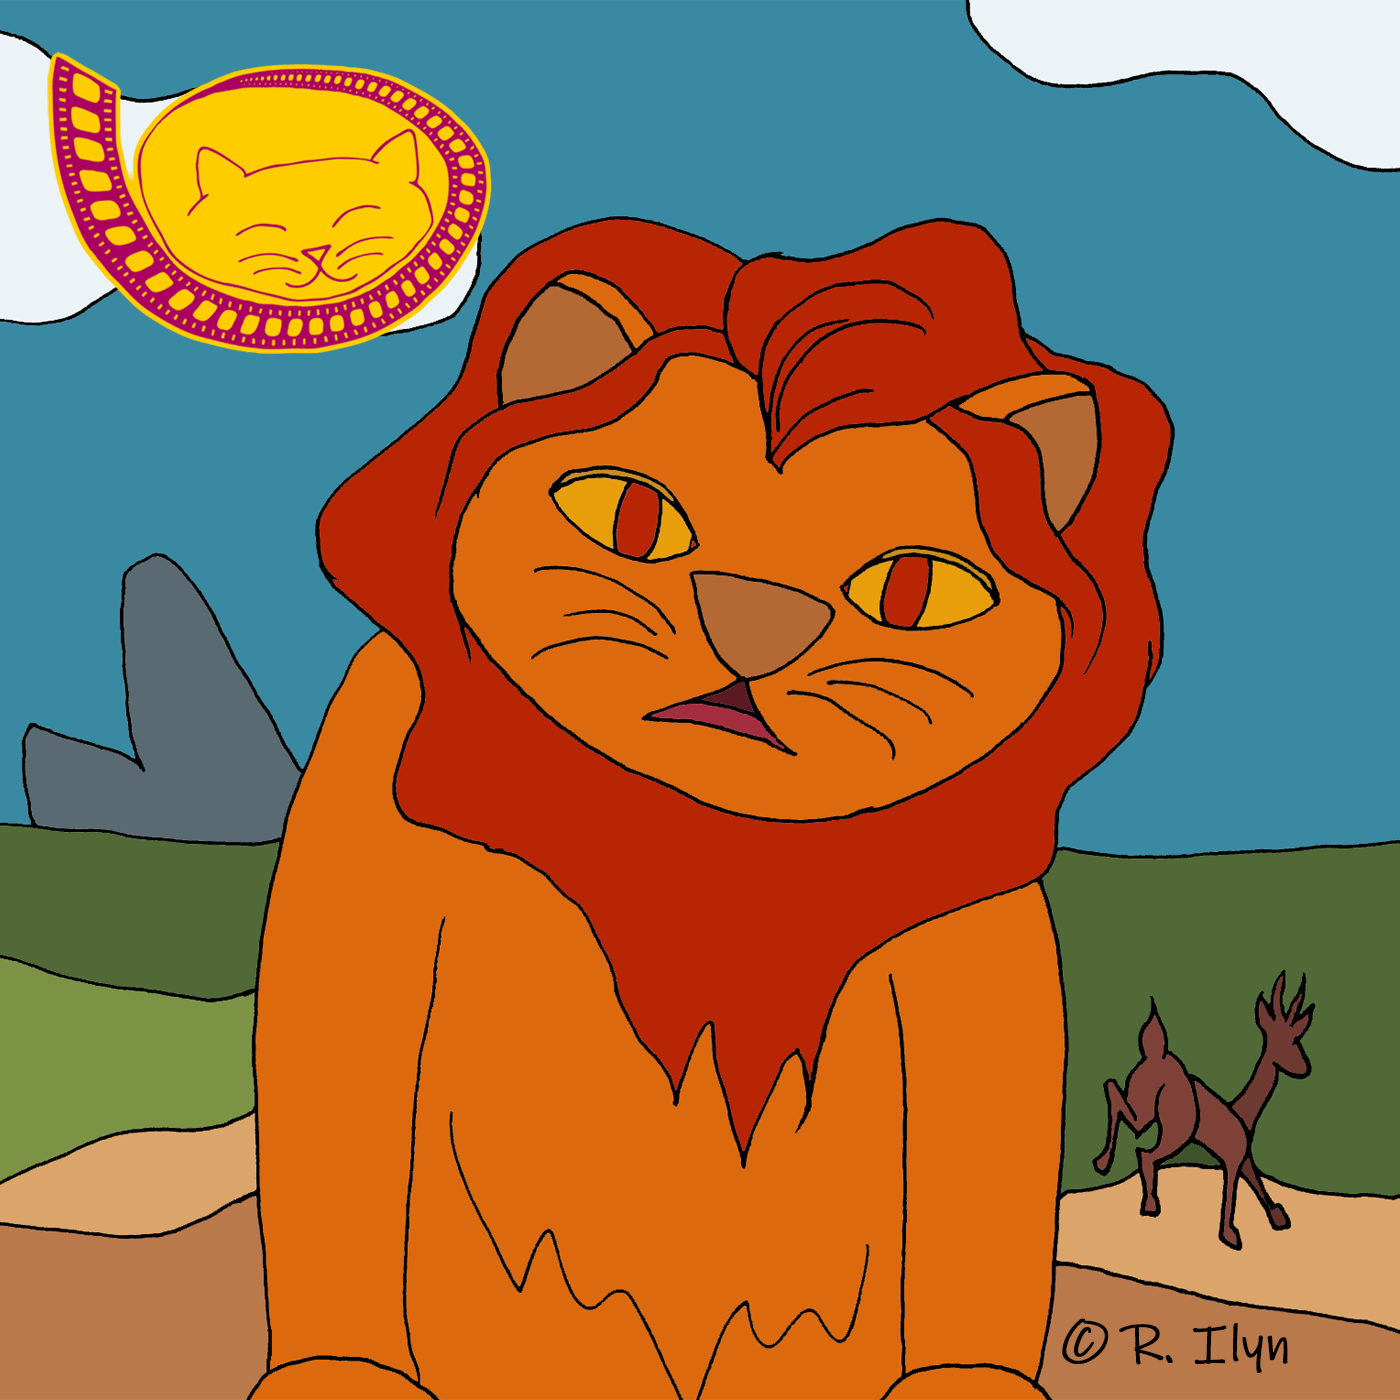 Illustration of Lion King Mufasa from the movie "The Lion King"